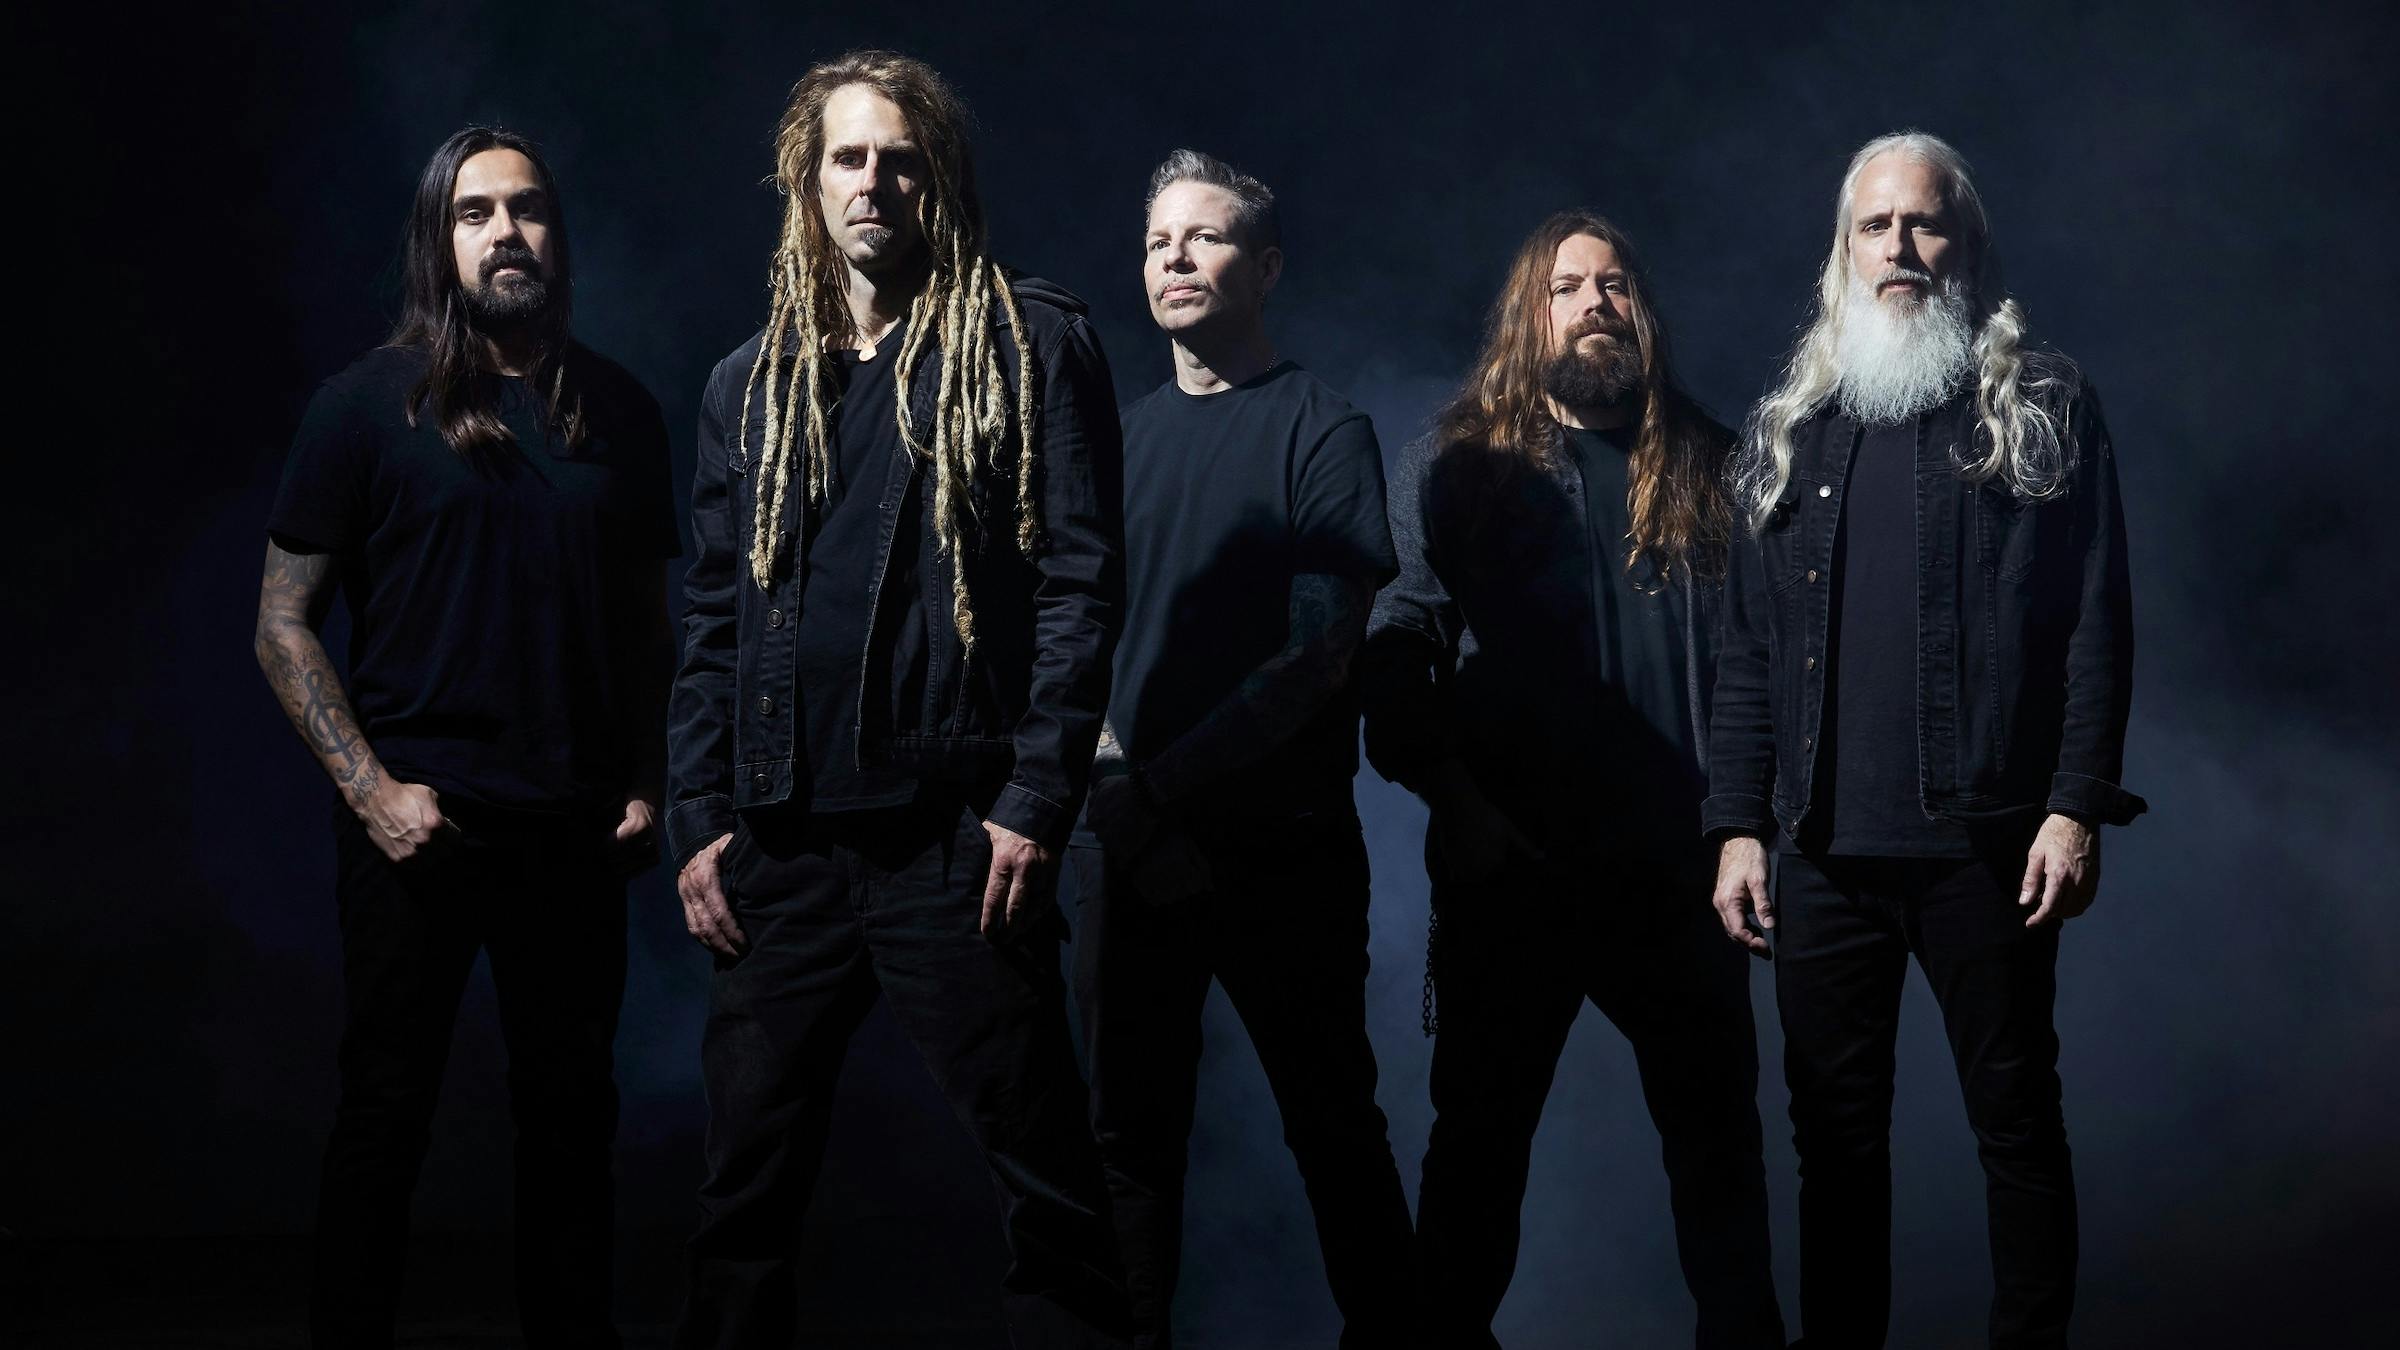 "The System Is A F*cking Fraud": The Story Behind Lamb Of God's New Song Checkmate